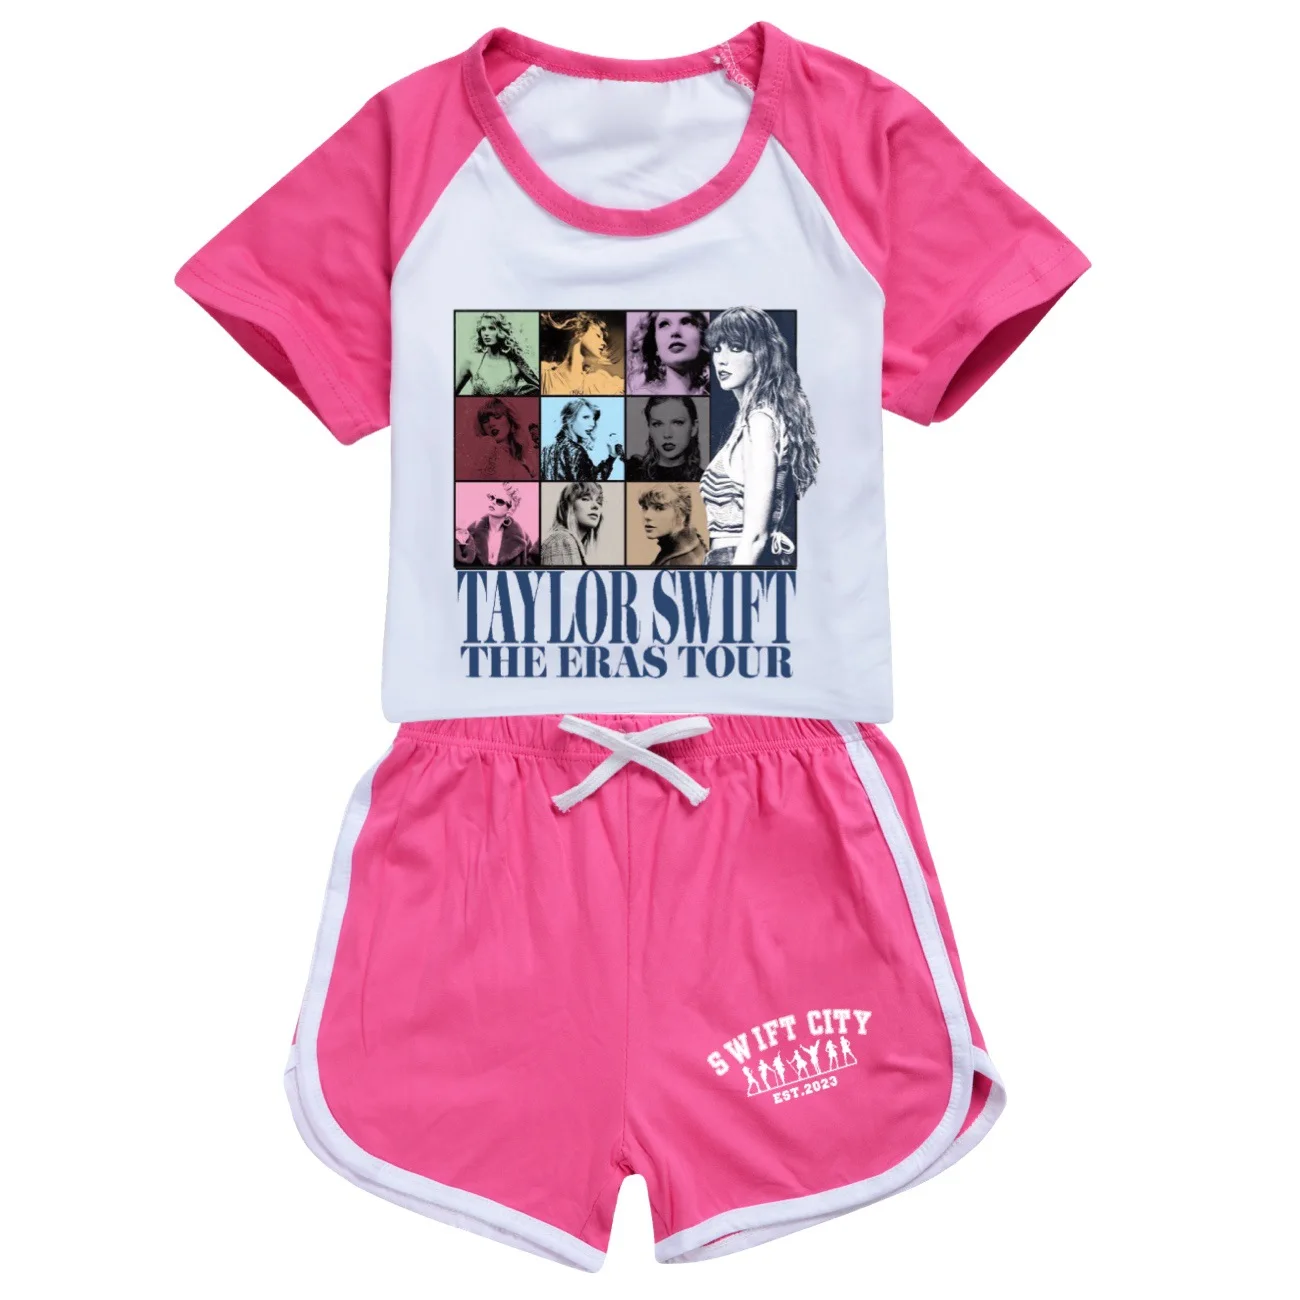 

Taylor swift Girls Boy Summer Clothing Suits Kids Sports T shirt+Shorts 2PC Set Children Clothing Casual comfort outfits Pyjamas